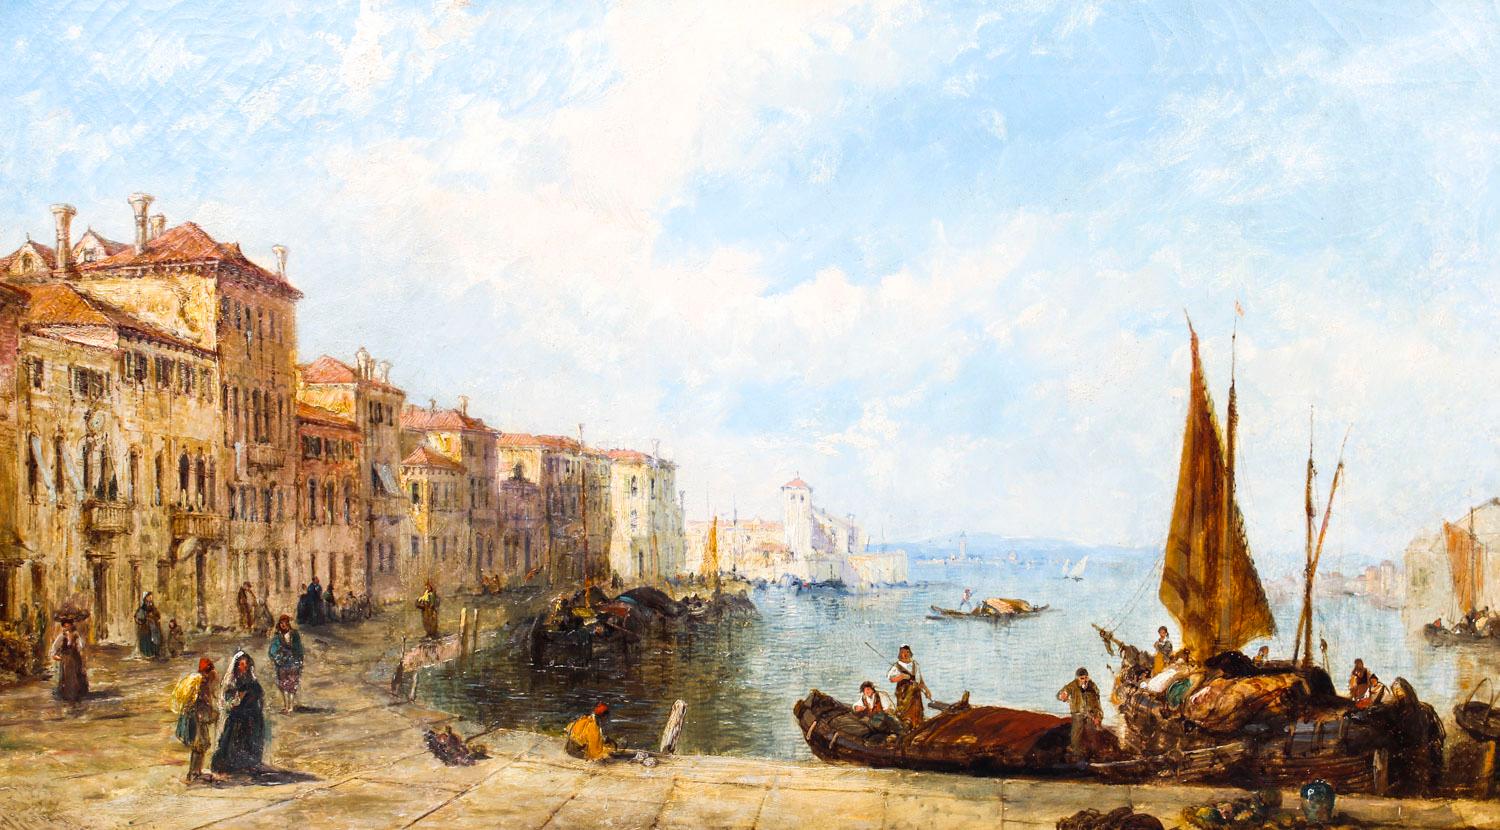 This lovely oil on canvas painting by Jane Vivian (Active 1869-1890) beautifully captures a Venetian Scene looking seawards from The Grand Canal.

This beautiful landscape captures a striking view of the banks of the Grand Canal, it features people